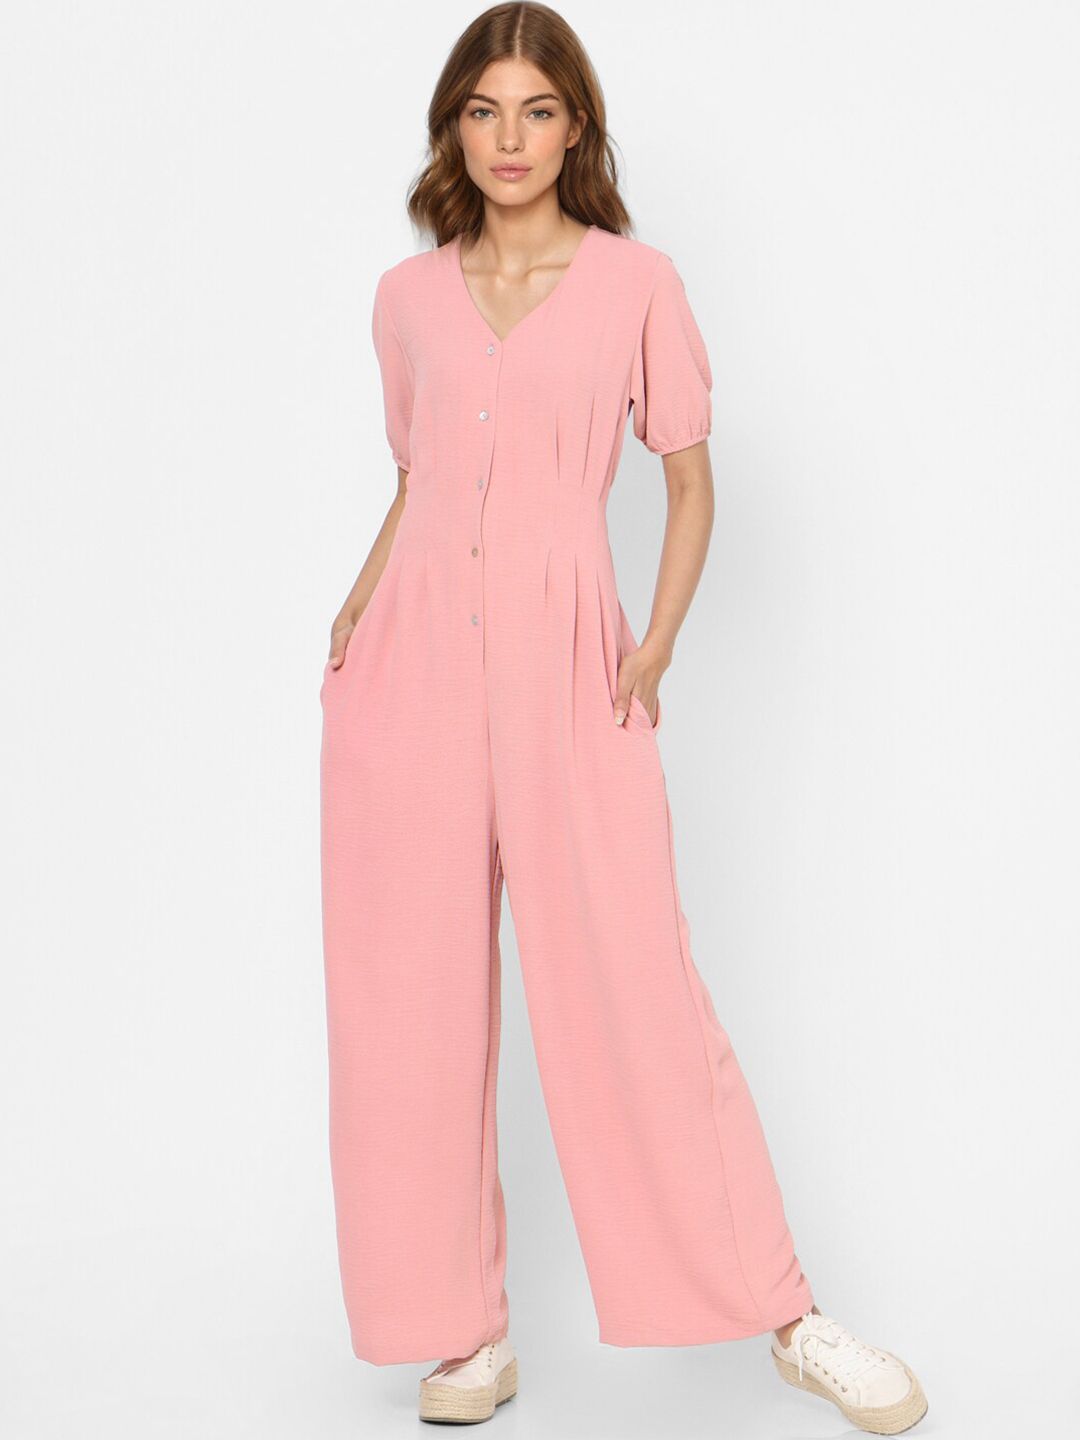 ONLY Women Pink Solid Short Sleeves Basic Jumpsuit Price in India